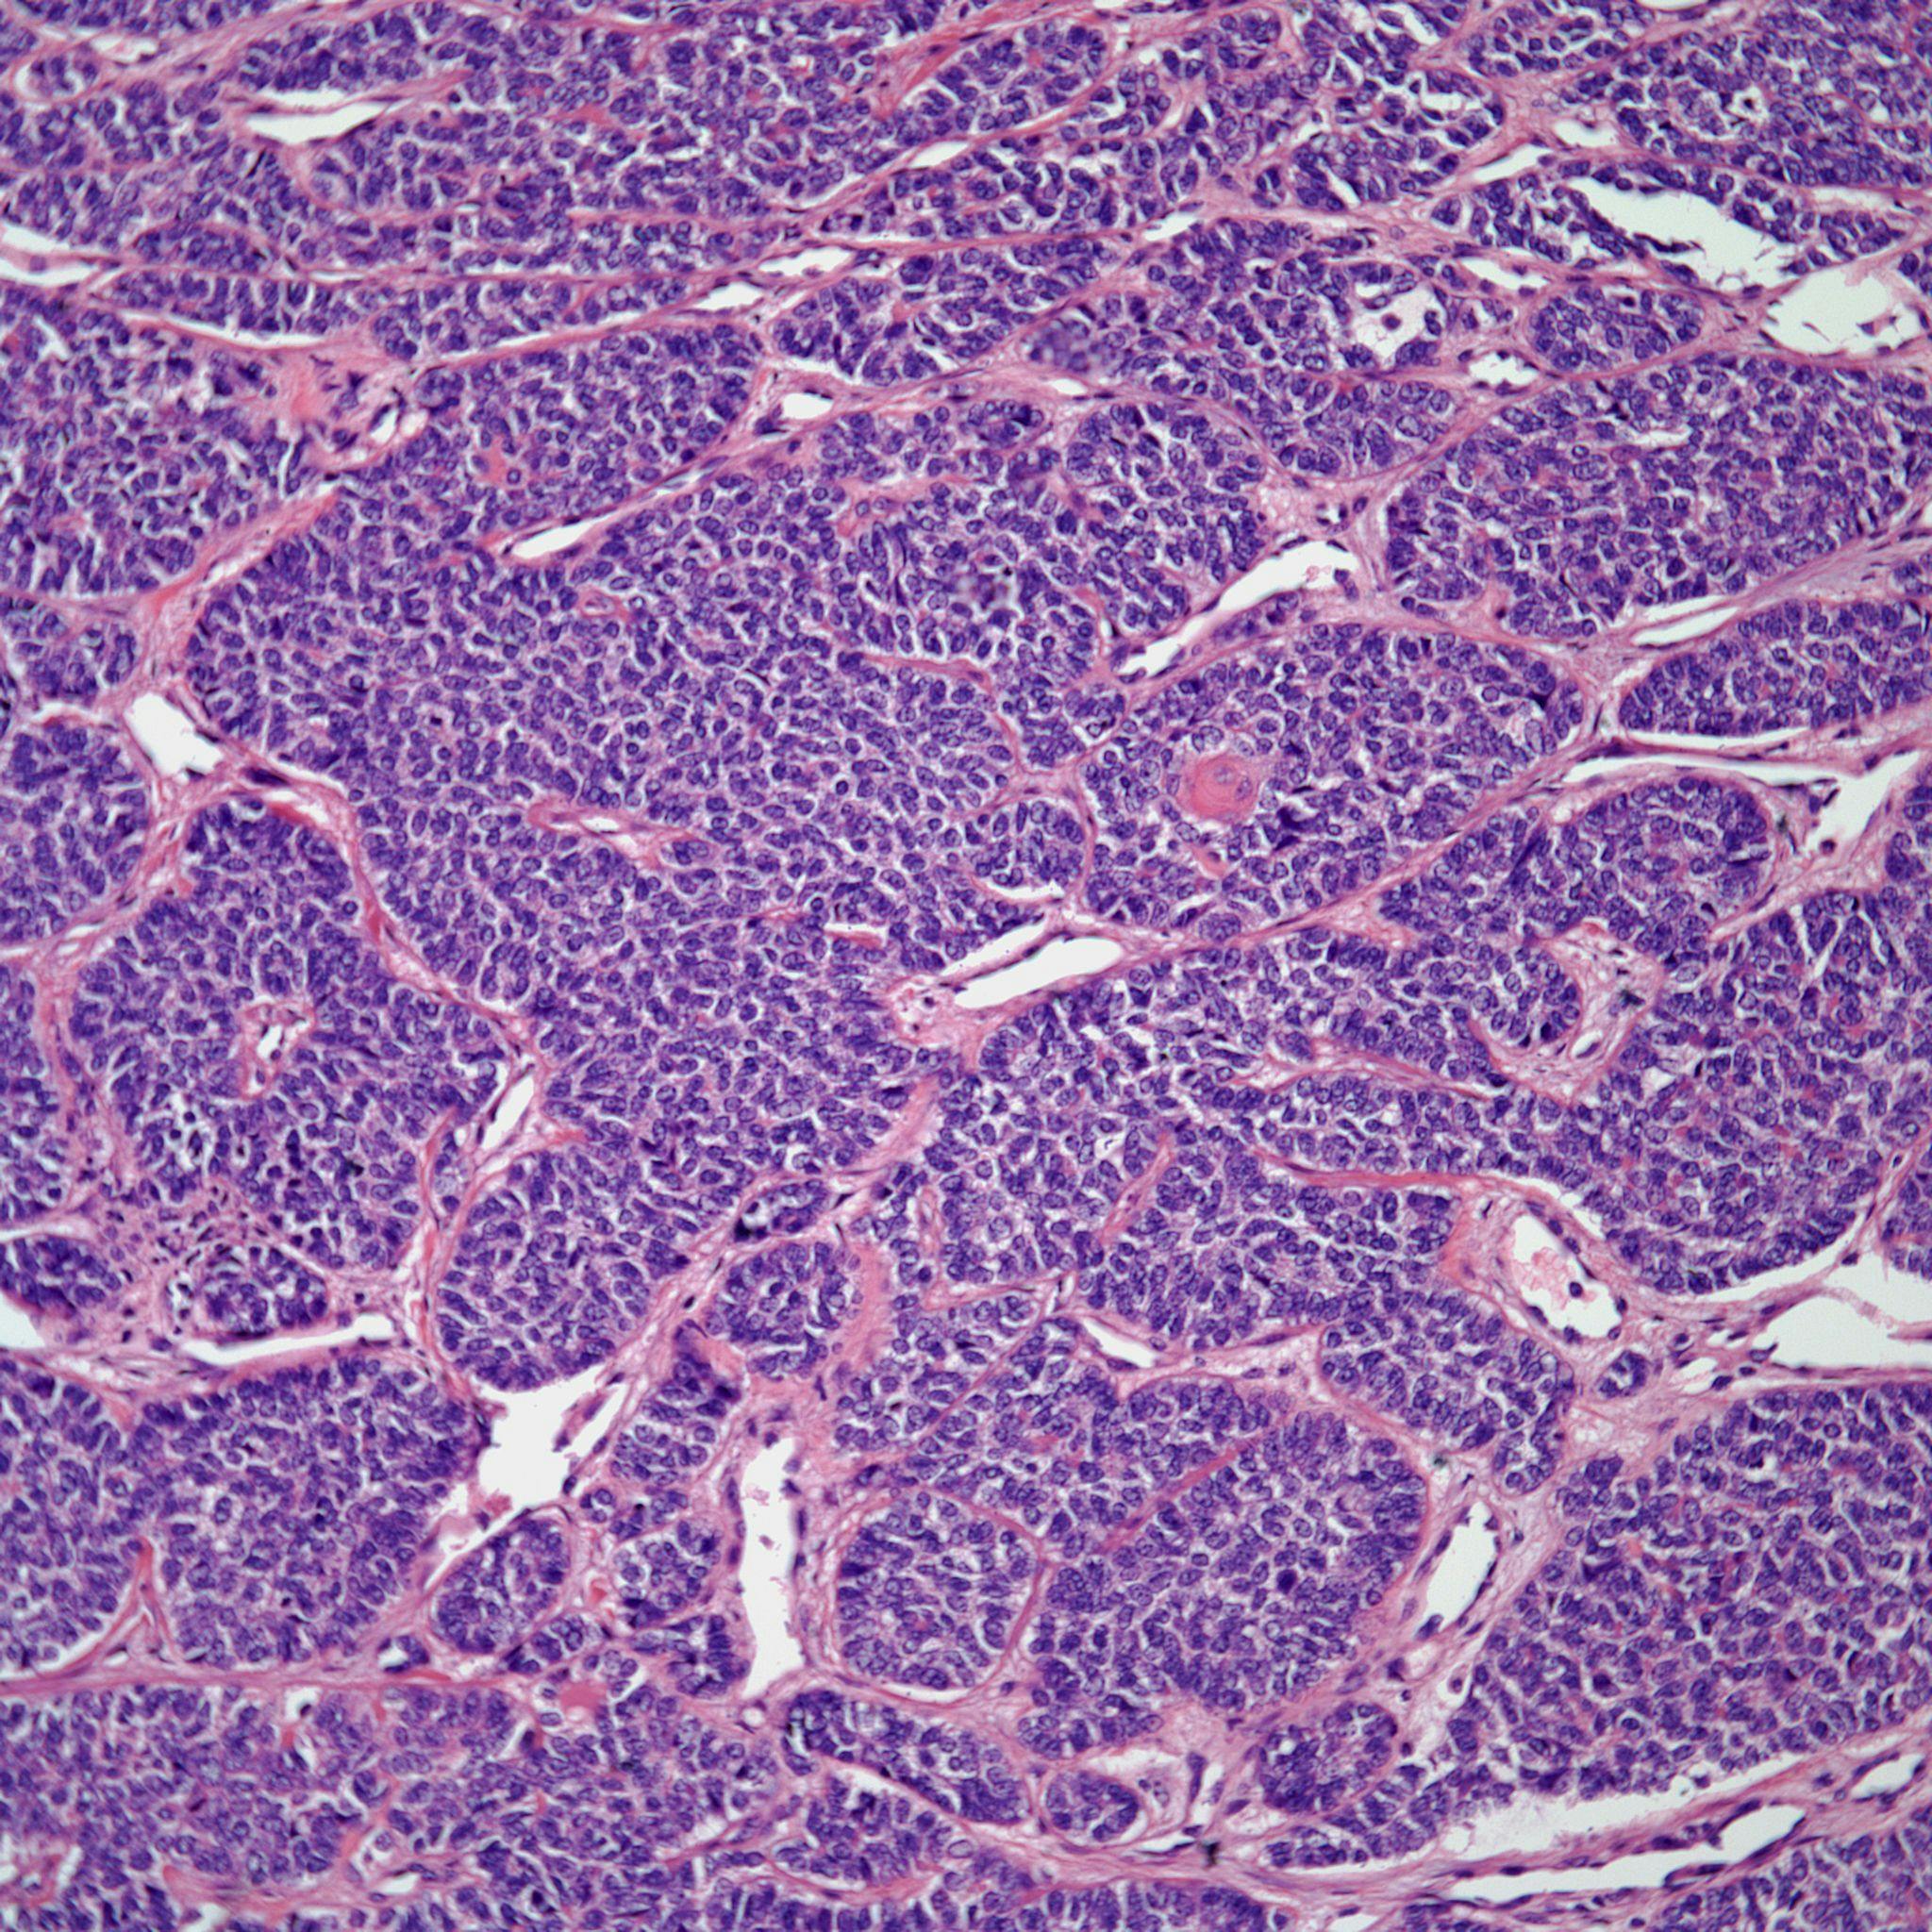 A 45-Year-Old With a Thyroid Gland Mass